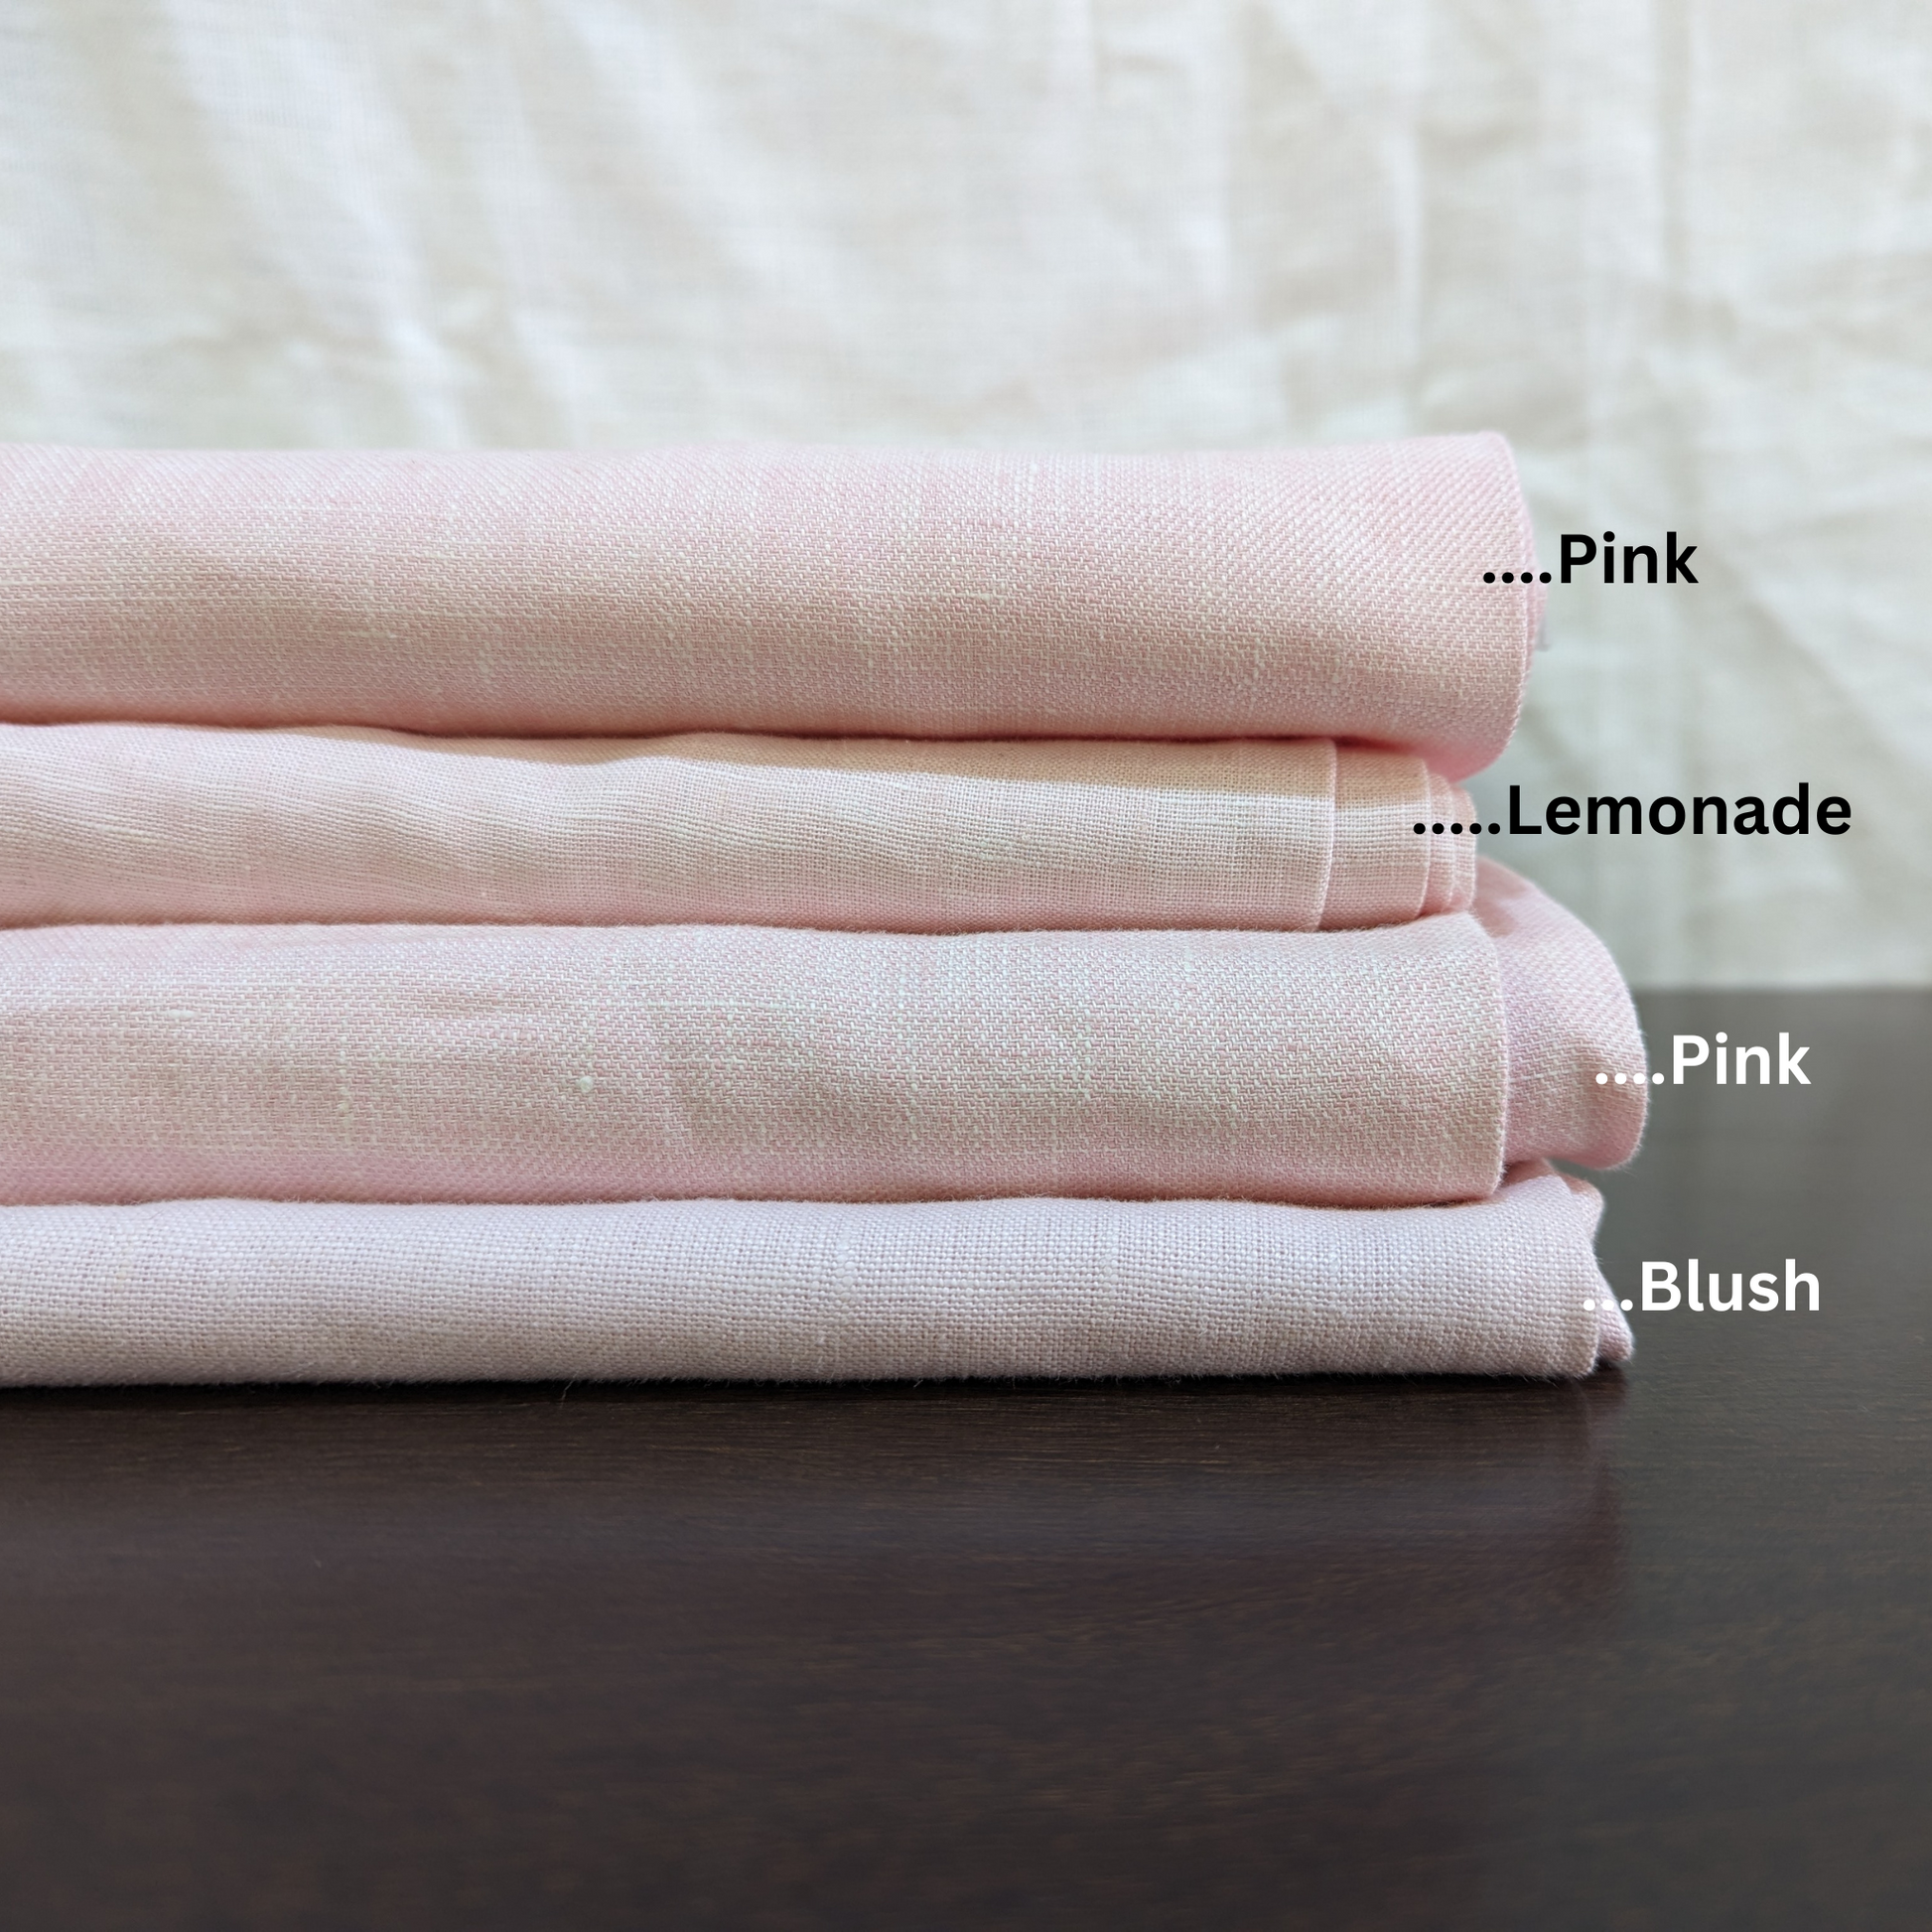 Pink: Shirting Pure Linen Fabric: Used for Shirts, Dresses, Tops, Bedding - OrganoLinen